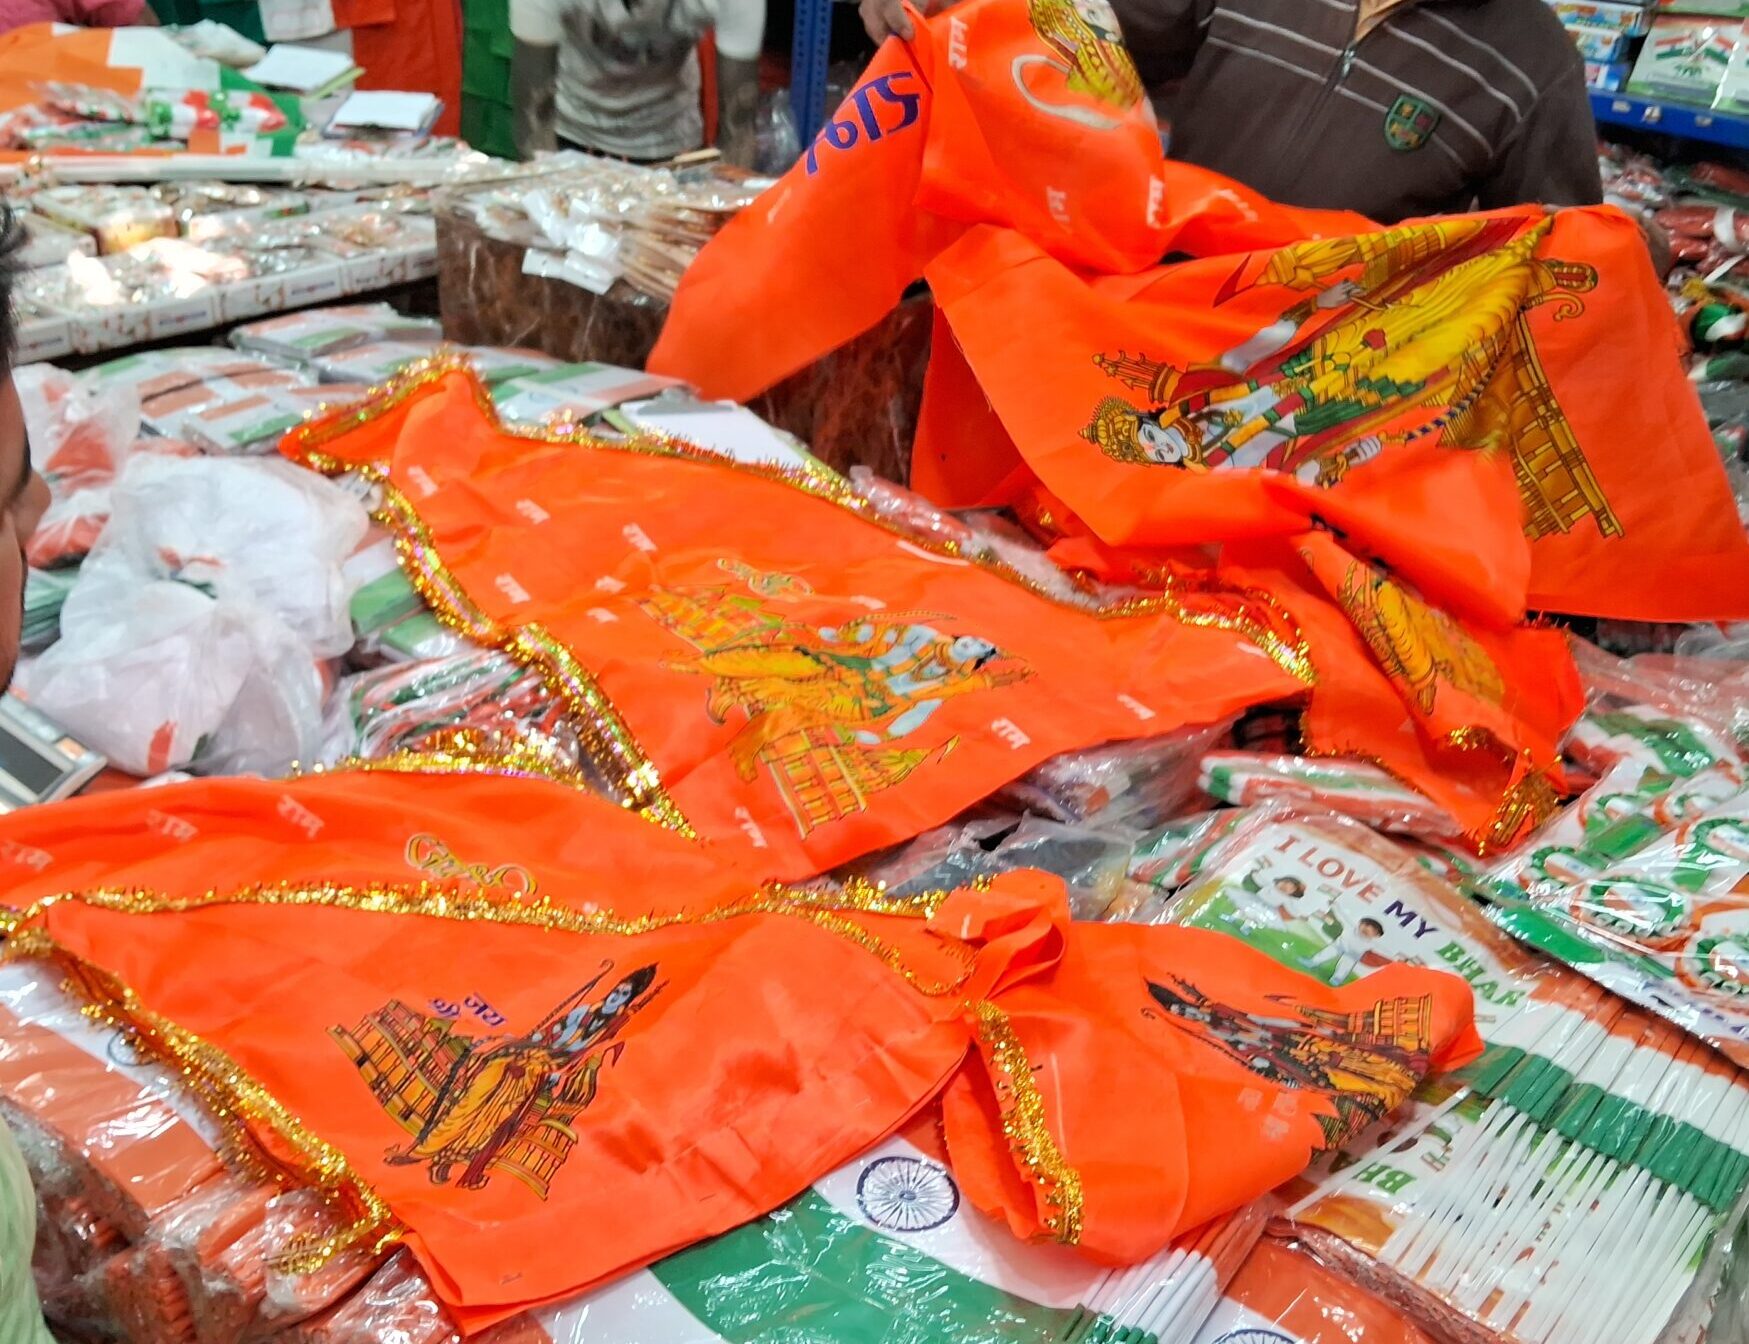 Surge in Demand for Shri Ram flags